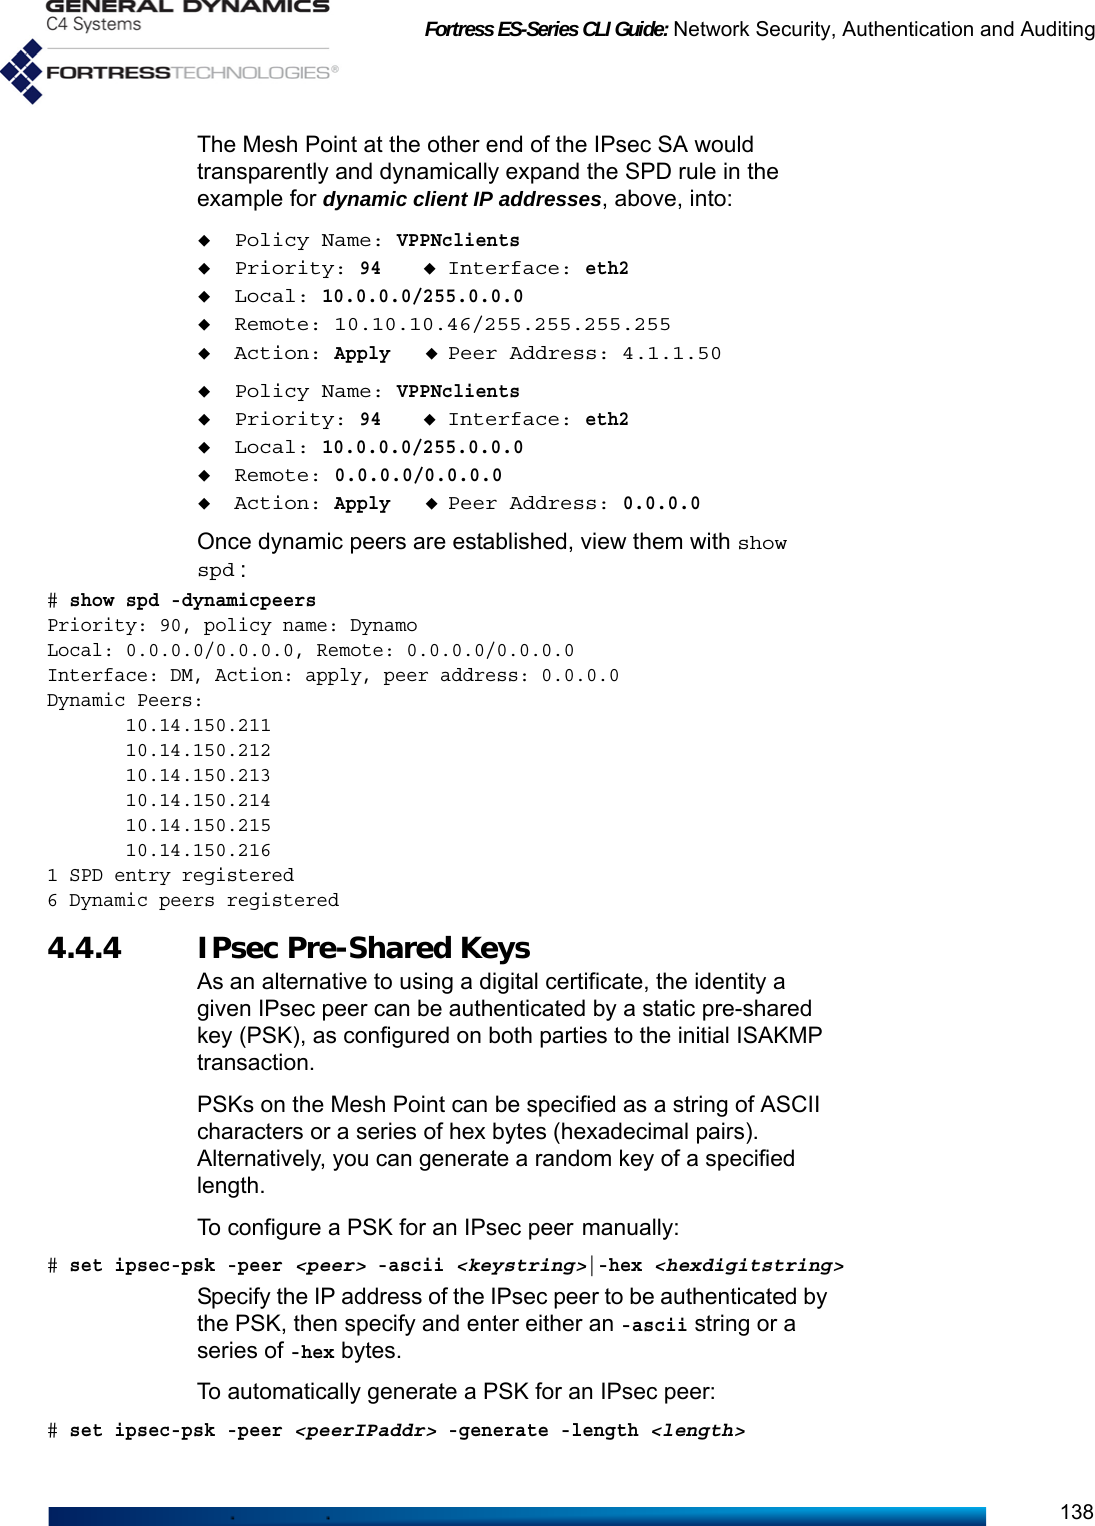 Fortress ES-Series CLI Guide: Network Security, Authentication and Auditing138The Mesh Point at the other end of the IPsec SA would transparently and dynamically expand the SPD rule in the example for dynamic client IP addresses, above, into:Policy Name: VPPNclientsPriority: 94Interface: eth2Local: 10.0.0.0/255.0.0.0Remote: 10.10.10.46/255.255.255.255Action: ApplyPeer Address: 4.1.1.50Policy Name: VPPNclientsPriority: 94Interface: eth2Local: 10.0.0.0/255.0.0.0Remote: 0.0.0.0/0.0.0.0Action: ApplyPeer Address: 0.0.0.0Once dynamic peers are established, view them with show spd :# show spd -dynamicpeersPriority: 90, policy name: DynamoLocal: 0.0.0.0/0.0.0.0, Remote: 0.0.0.0/0.0.0.0Interface: DM, Action: apply, peer address: 0.0.0.0Dynamic Peers:       10.14.150.211       10.14.150.212       10.14.150.213       10.14.150.214       10.14.150.215       10.14.150.2161 SPD entry registered6 Dynamic peers registered4.4.4 IPsec Pre-Shared KeysAs an alternative to using a digital certificate, the identity a given IPsec peer can be authenticated by a static pre-shared key (PSK), as configured on both parties to the initial ISAKMP transaction.PSKs on the Mesh Point can be specified as a string of ASCII characters or a series of hex bytes (hexadecimal pairs). Alternatively, you can generate a random key of a specified length.To configure a PSK for an IPsec peer manually:# set ipsec-psk -peer &lt;peer&gt; -ascii &lt;keystring&gt;|-hex &lt;hexdigitstring&gt;Specify the IP address of the IPsec peer to be authenticated by the PSK, then specify and enter either an -ascii string or a series of -hex bytes.To automatically generate a PSK for an IPsec peer:# set ipsec-psk -peer &lt;peerIPaddr&gt; -generate -length &lt;length&gt;